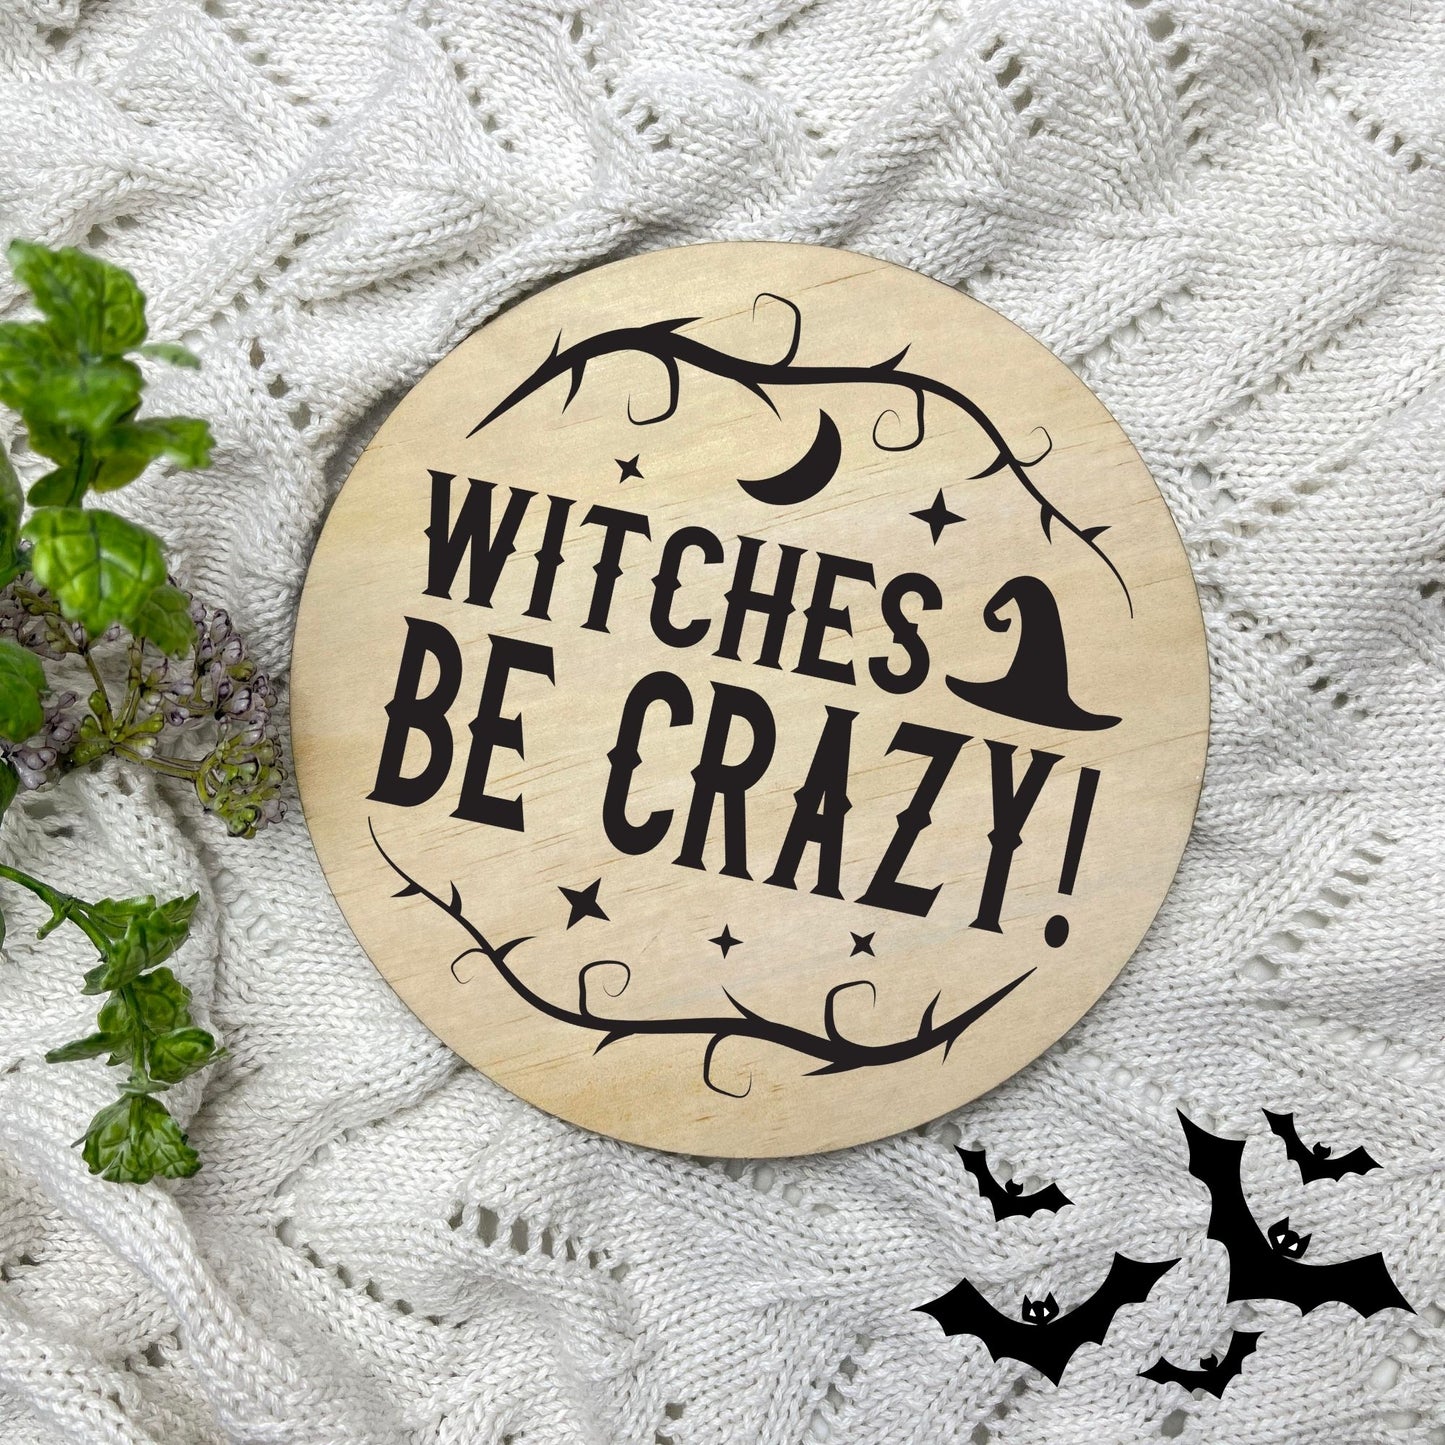 Witches be crazy sign, Halloween Decor, Spooky Vibes, hocus pocus sign, trick or treat decor, haunted house h47